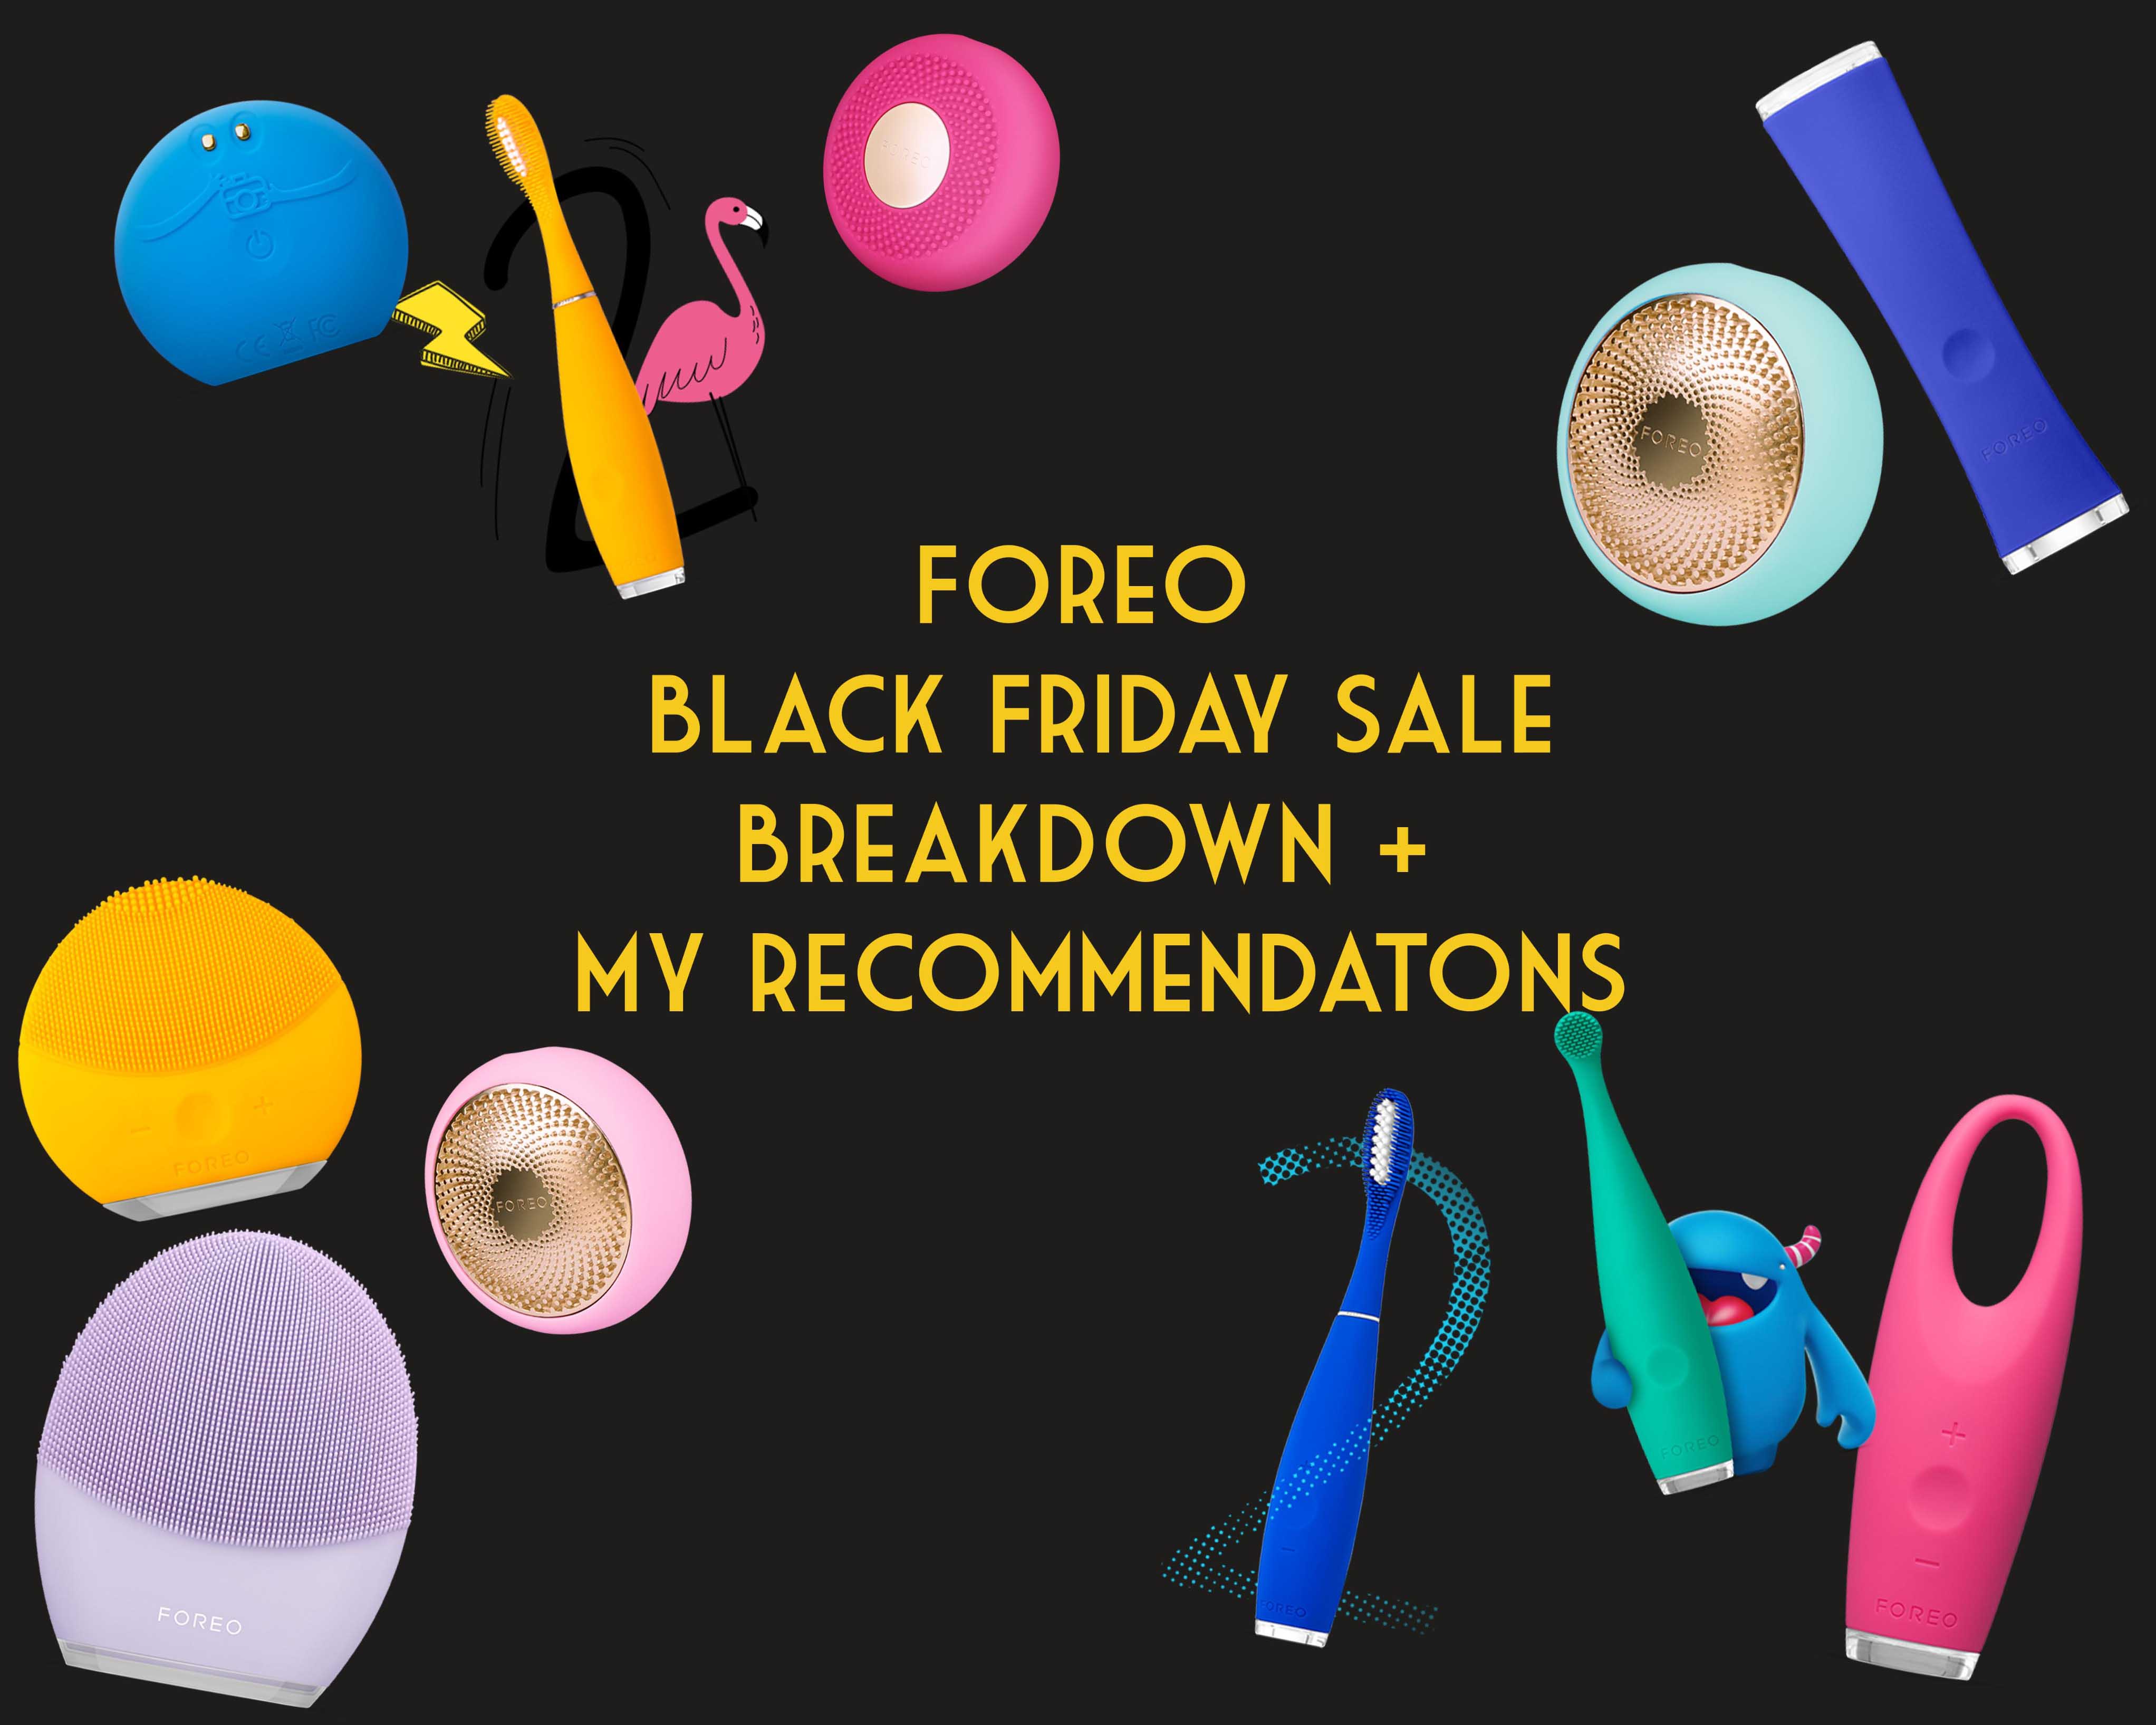 Foreo black friday sale 2020 review and breakdown